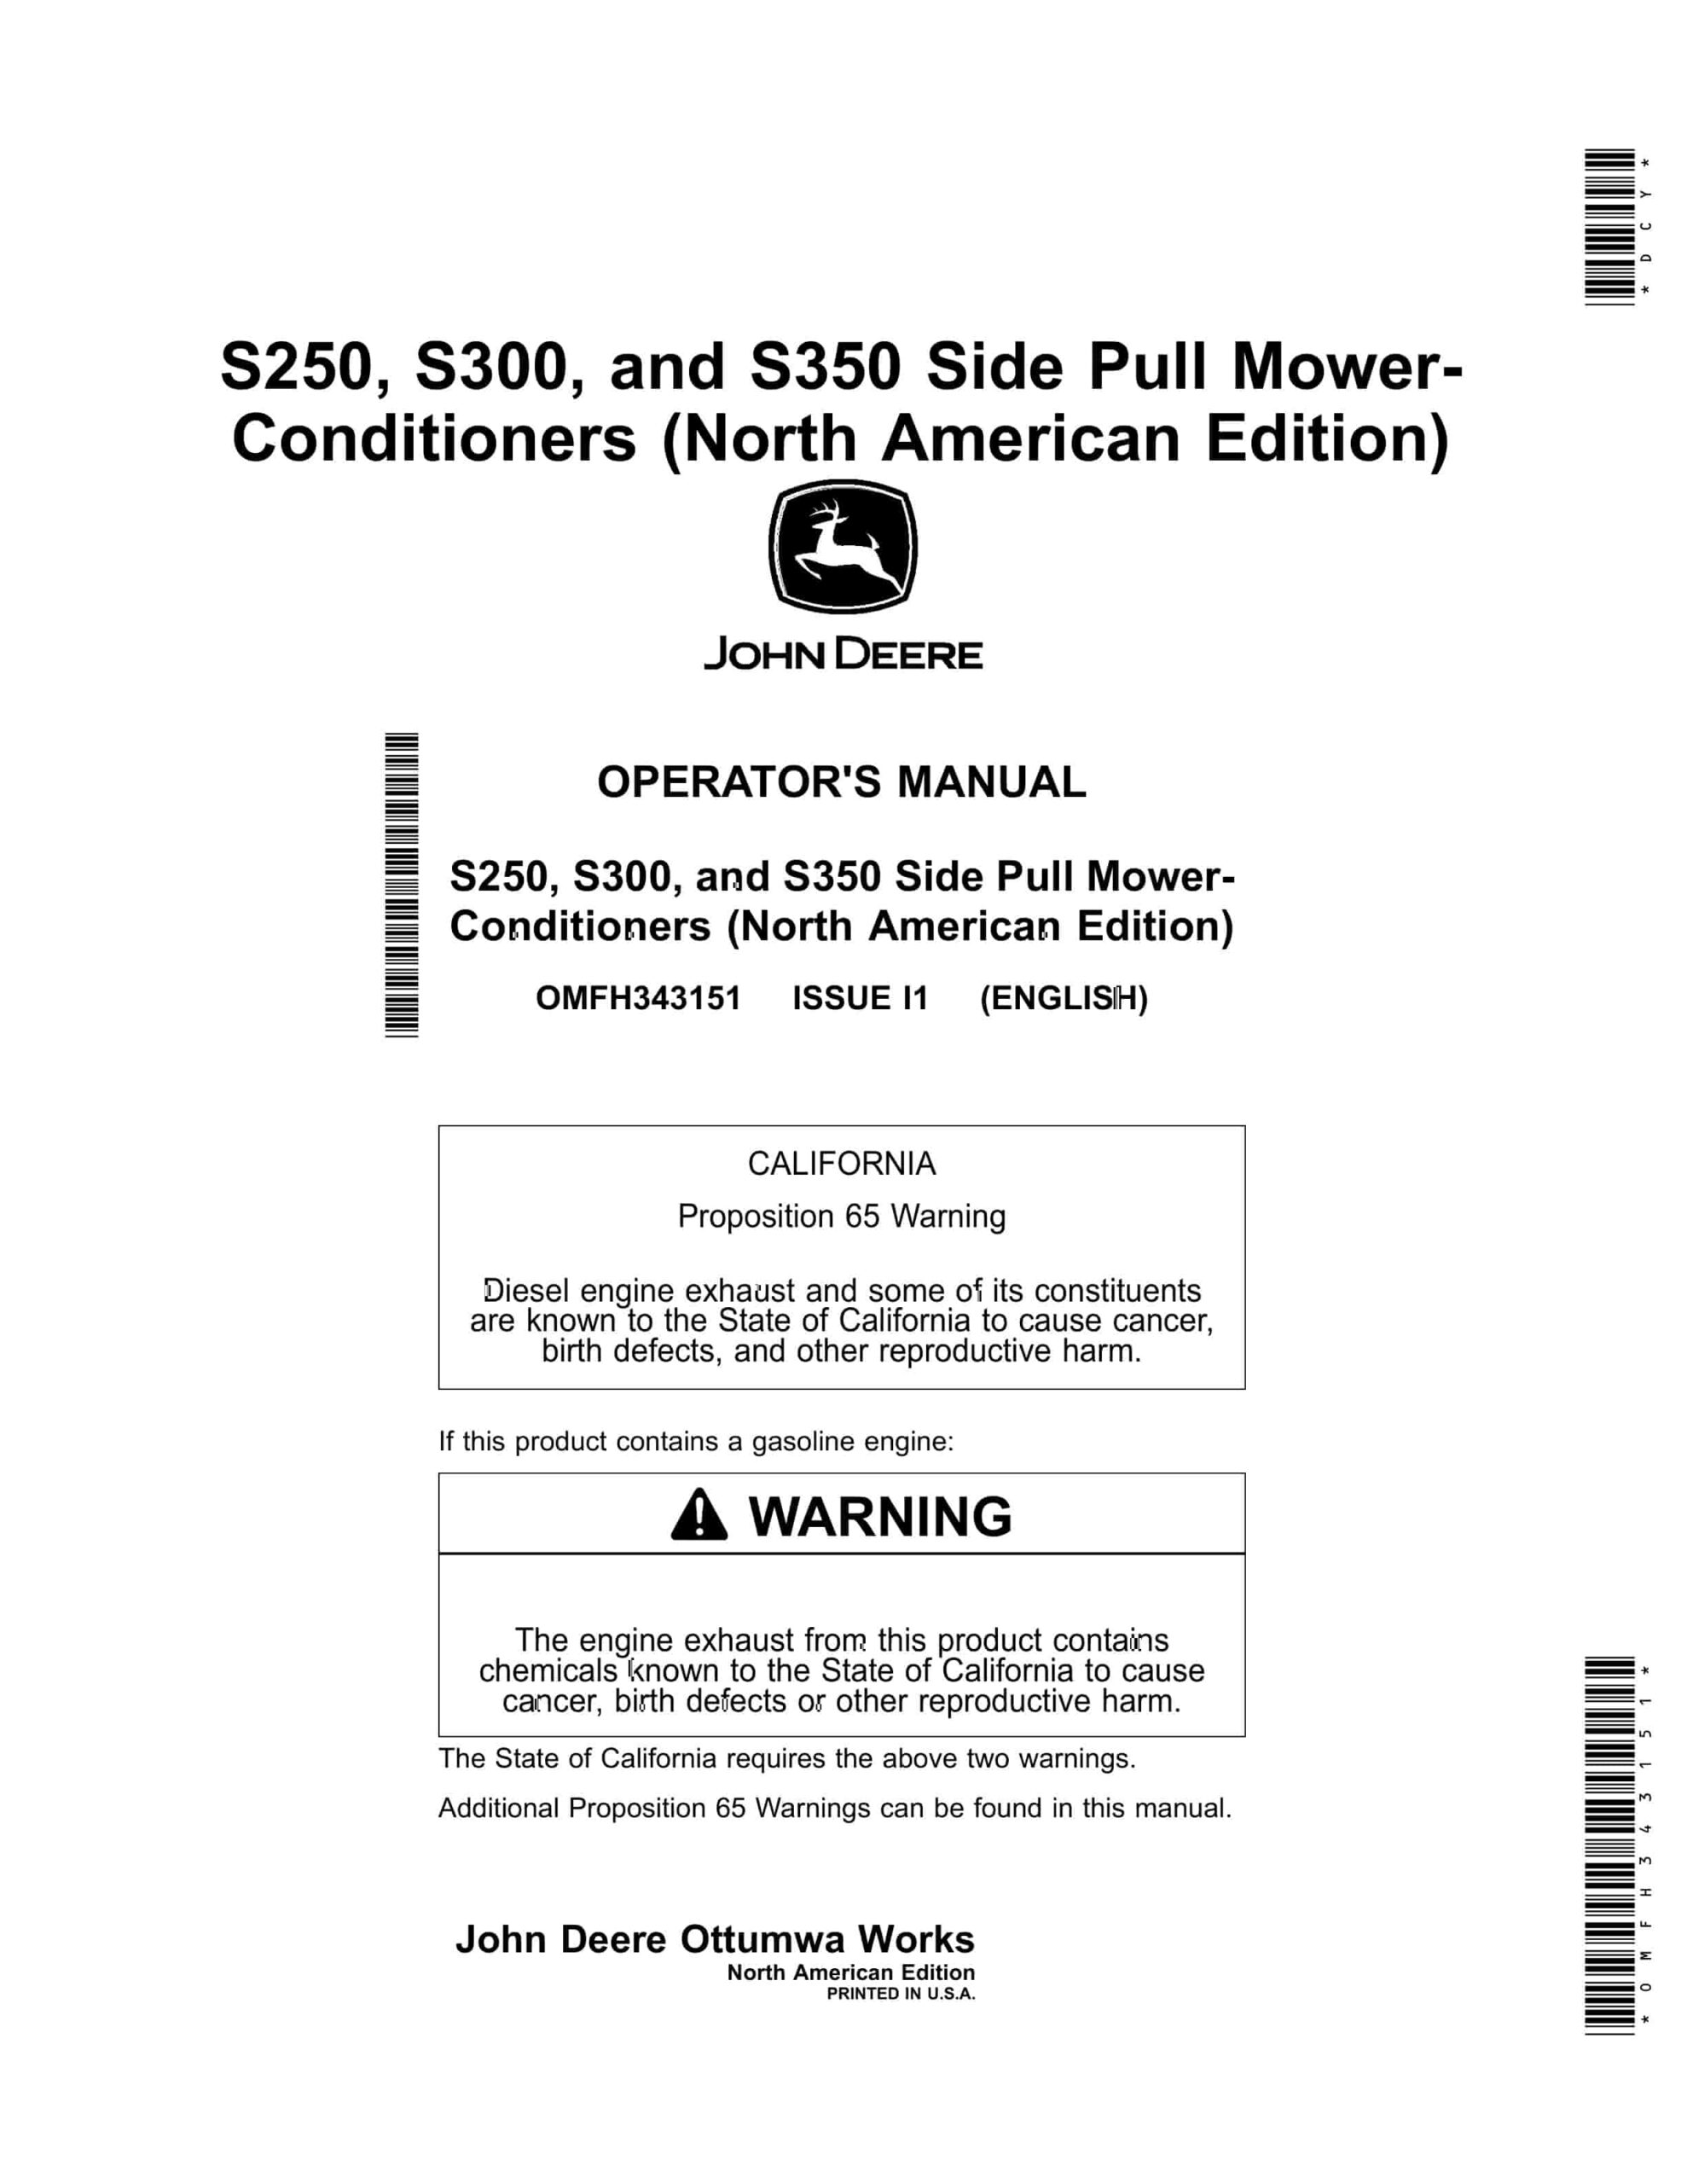 John Deere S250, S300, and S350 Side Pull Mower Conditioner Operator Manual OMFH343151-1